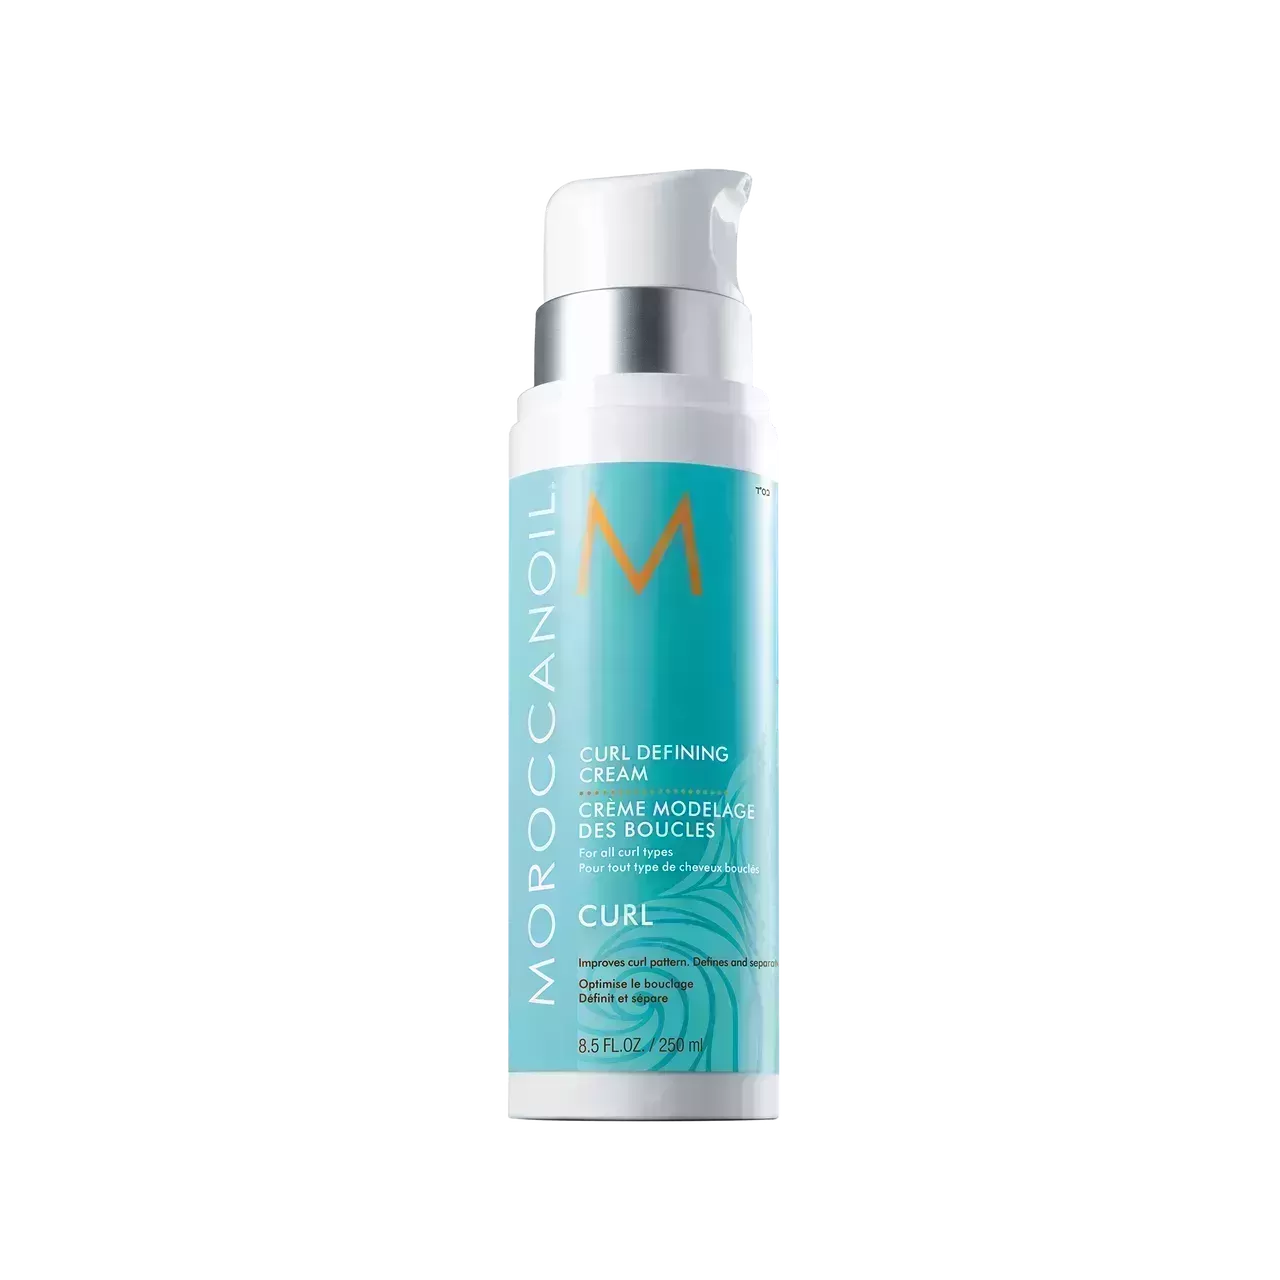 Moroccanoil Curl Defining Cream on clear background